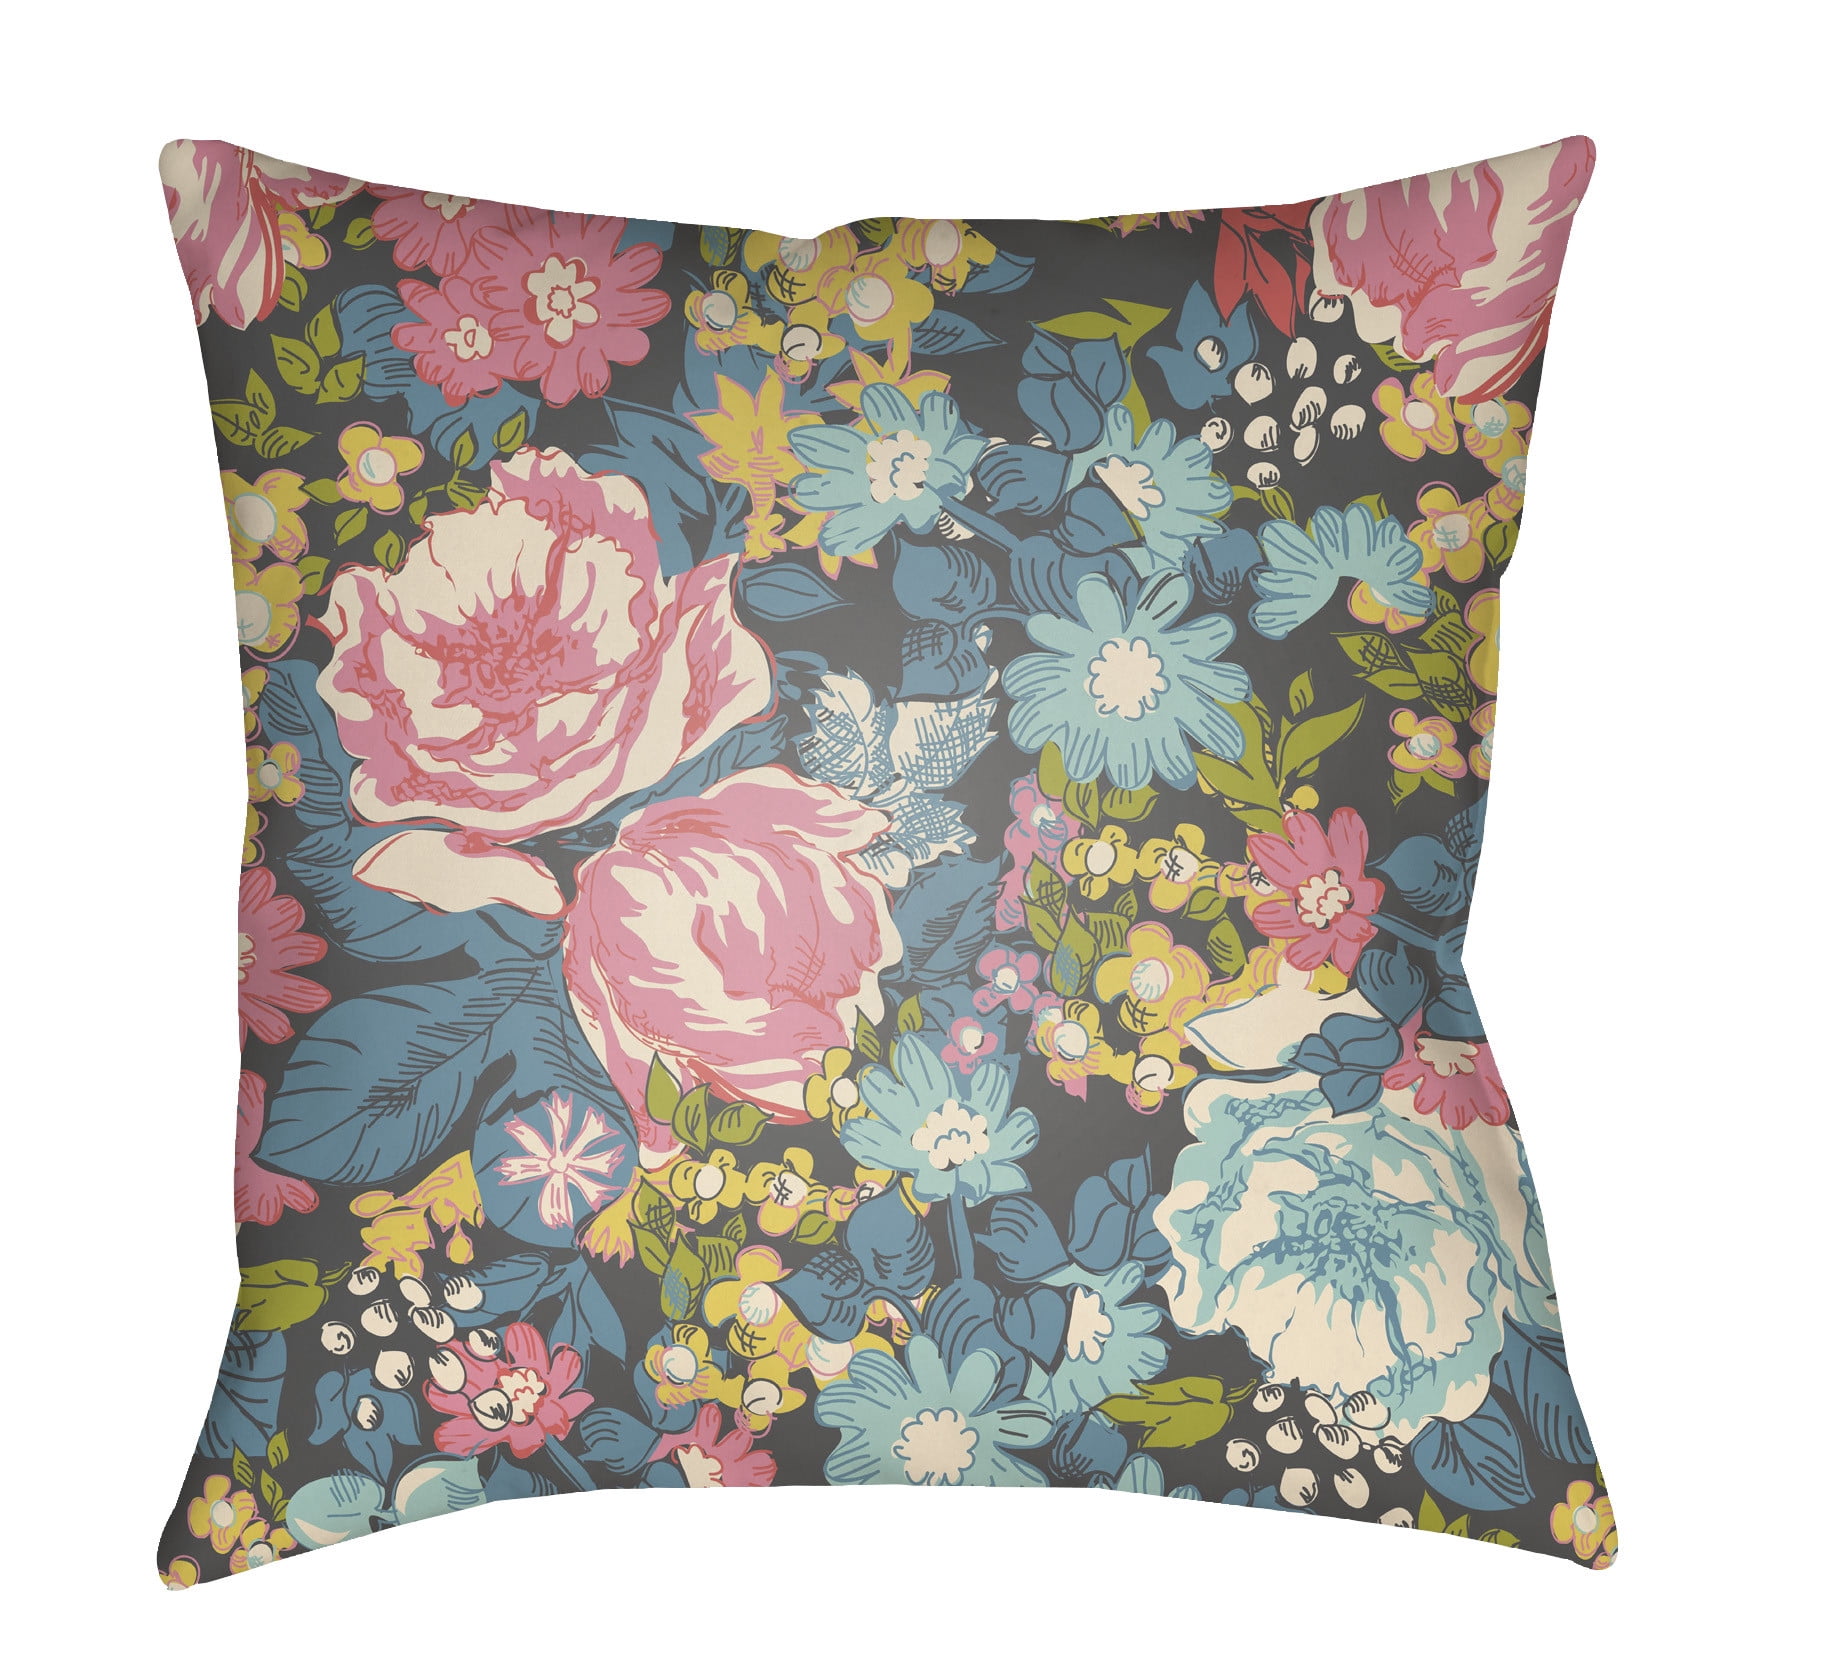 Picture of Artistic Weavers LOTA1100-2626 Lolita Square Pillow, Carnation Pink & Denim Blue - 26 x 26 in.